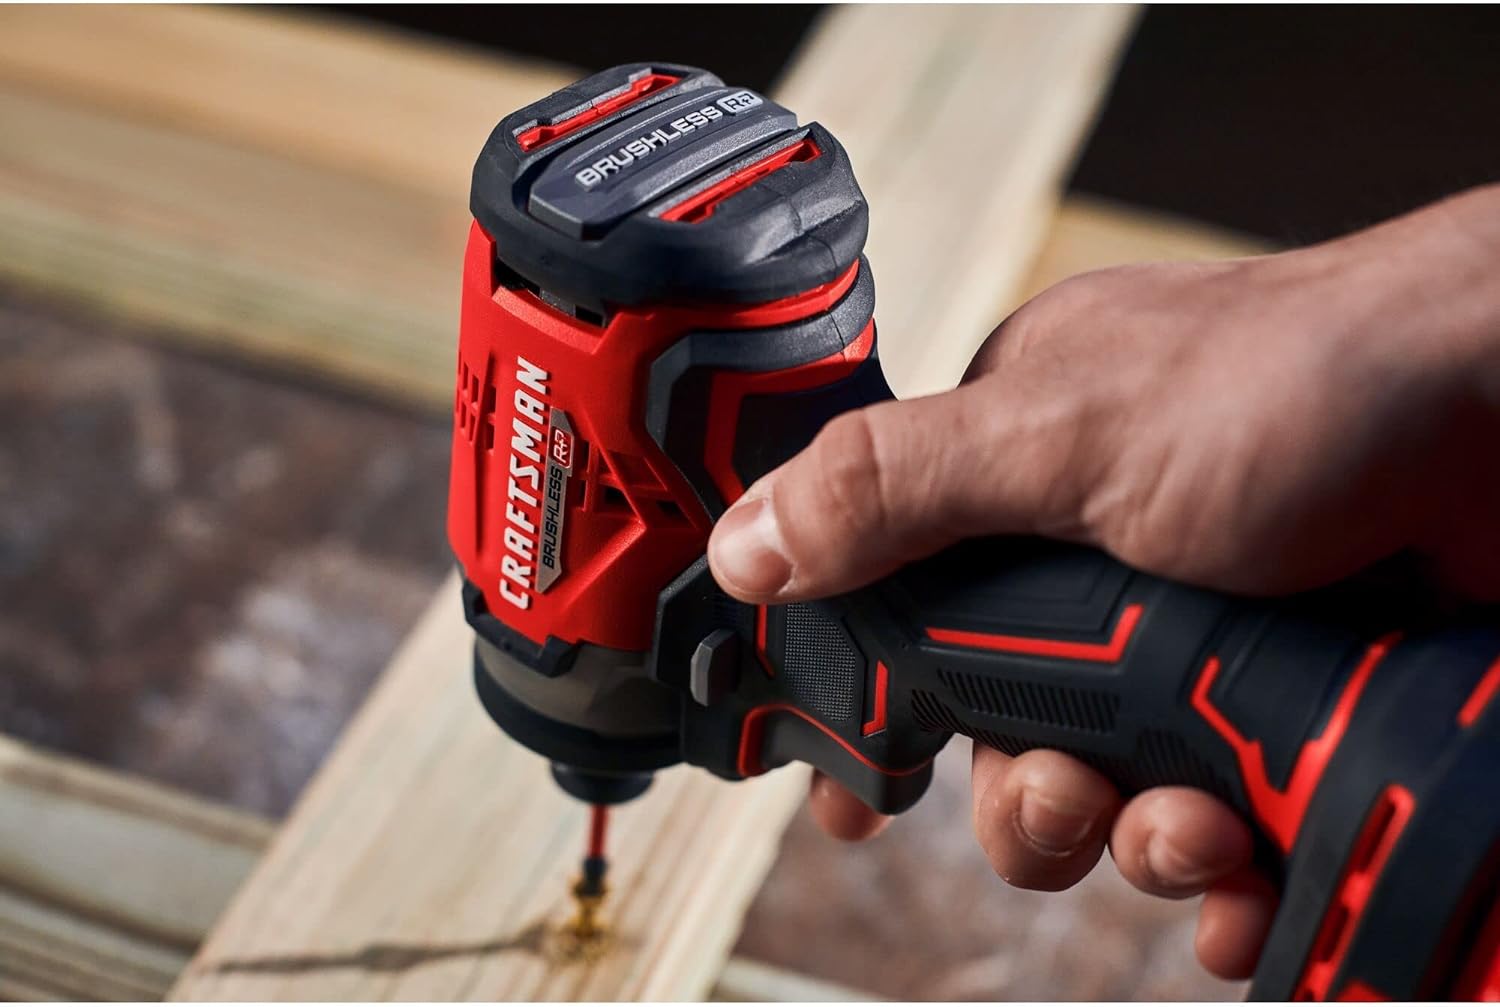 Craftsman V20 Rp Cordless Drill And Impact Driver, Power Tool Combo Kit, 2 Batteries And Charger Included (Cmck211C2)